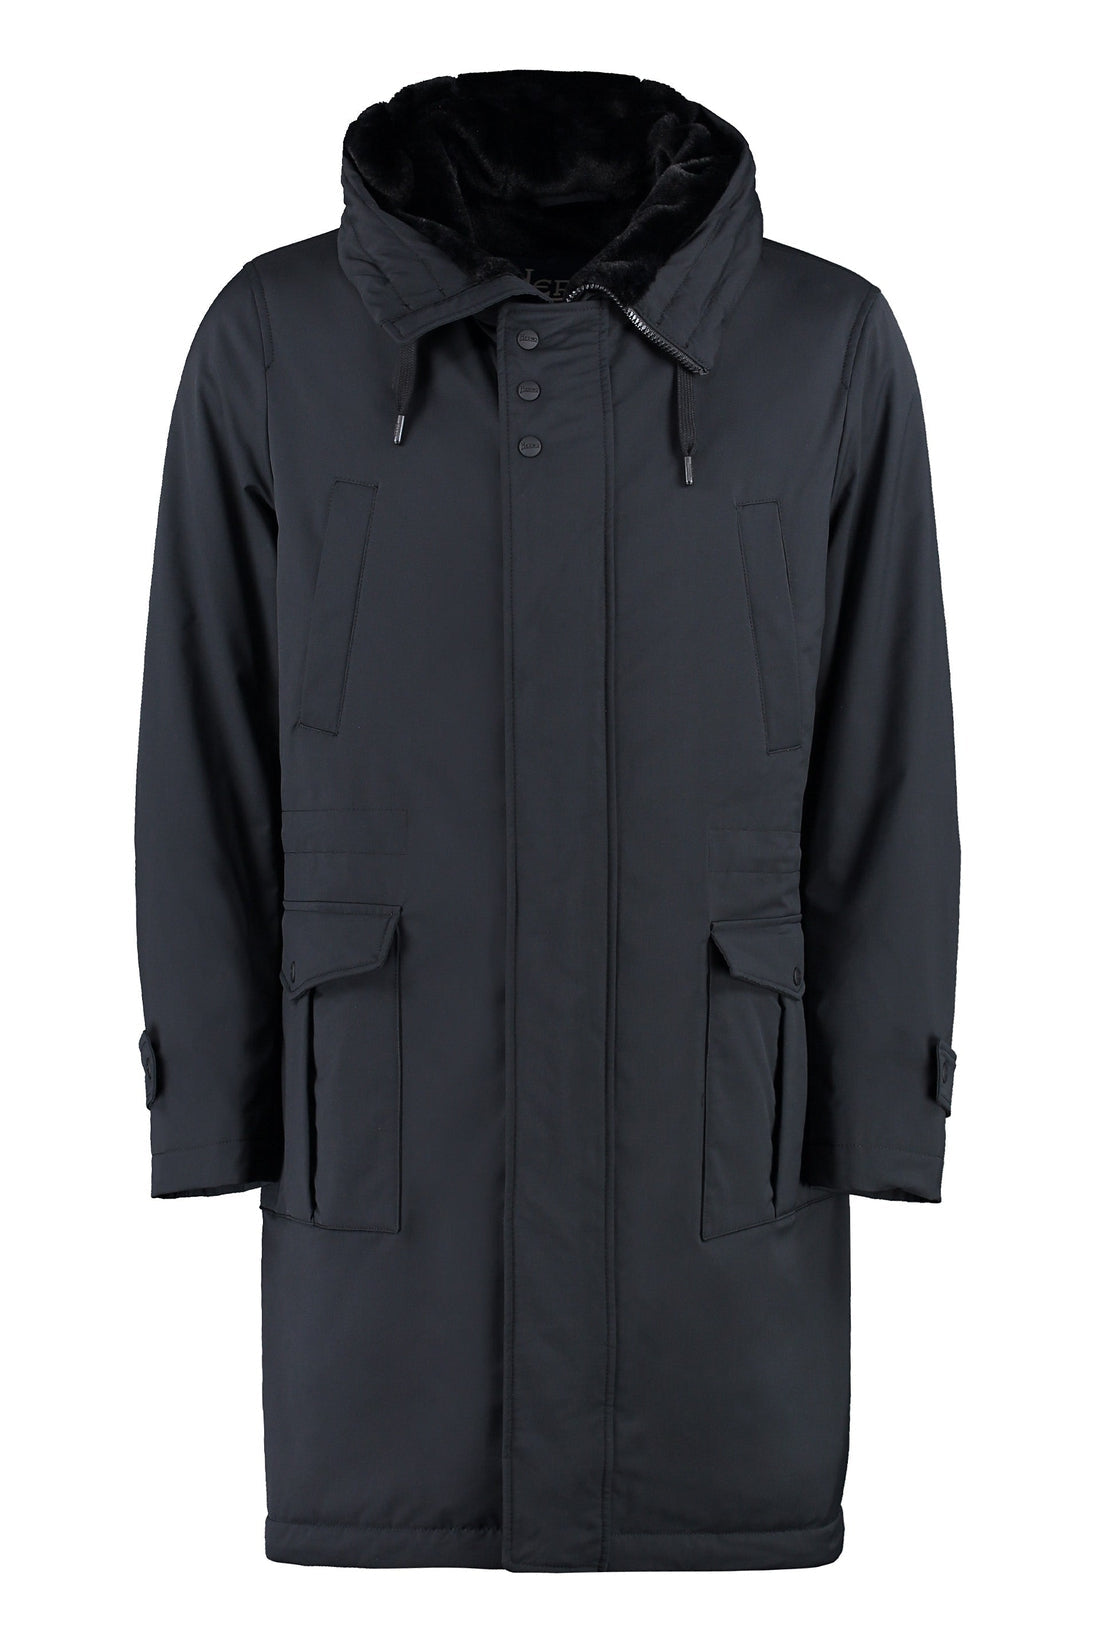 Herno-OUTLET-SALE-Technical fabric parka-ARCHIVIST